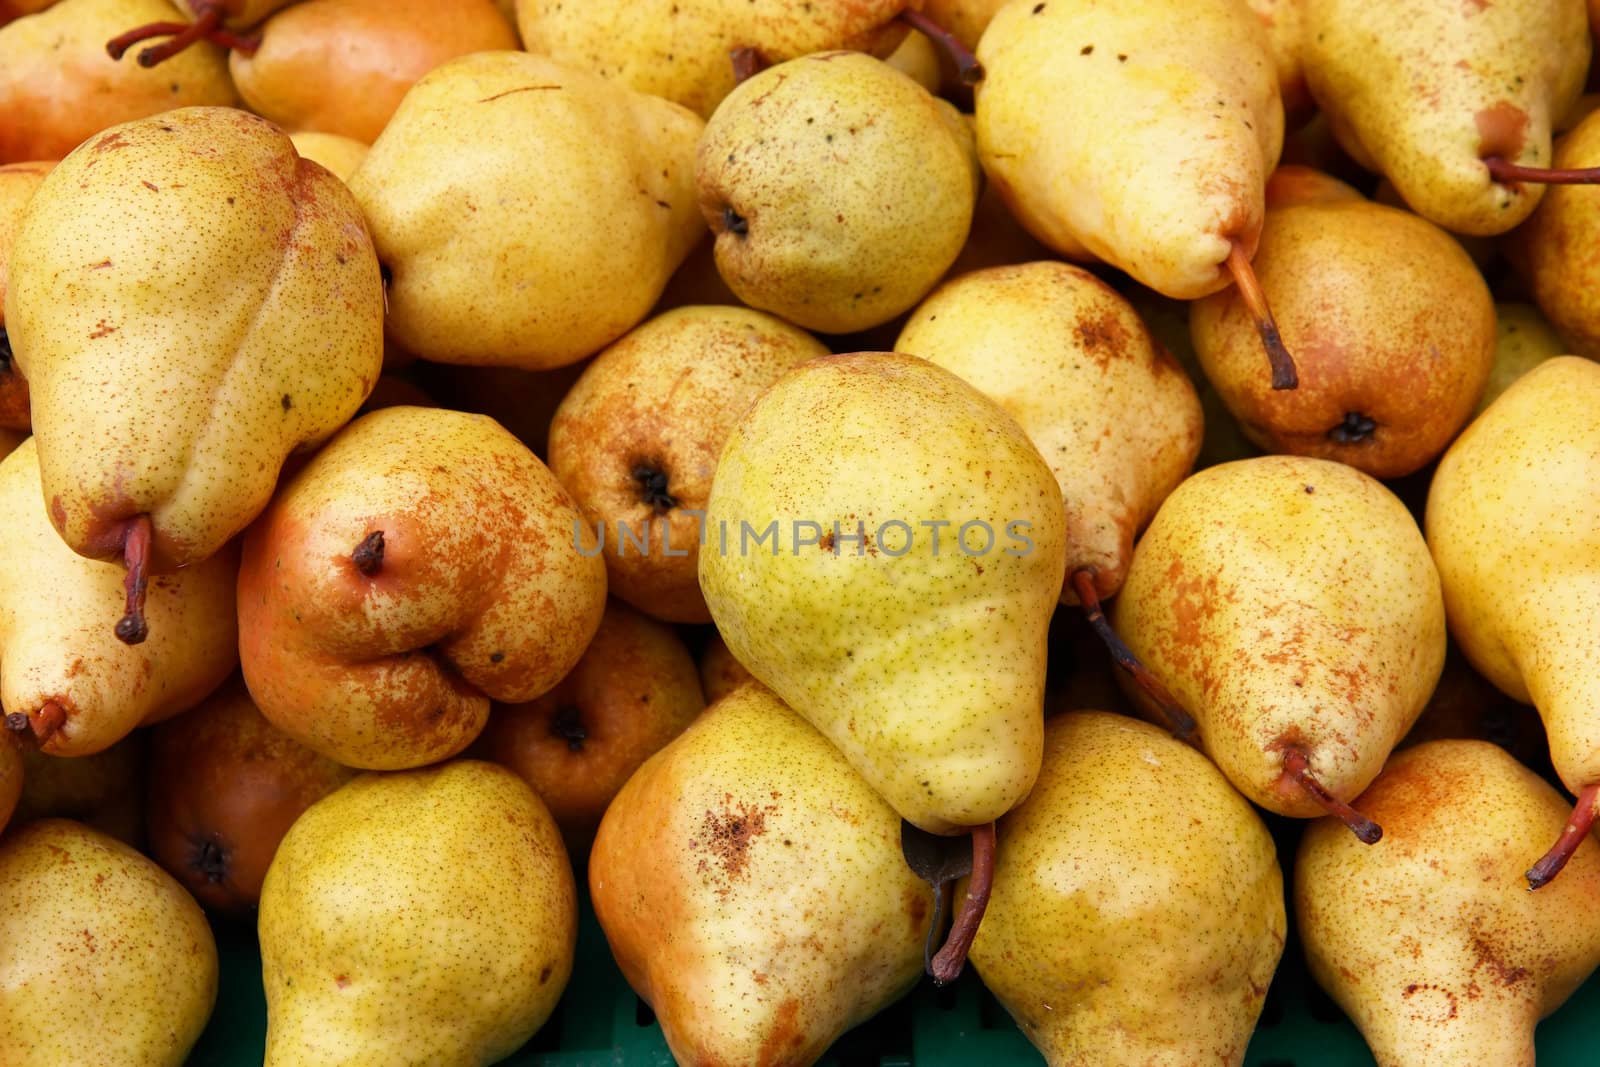 Lot of ripe fresh yellow pears on local market